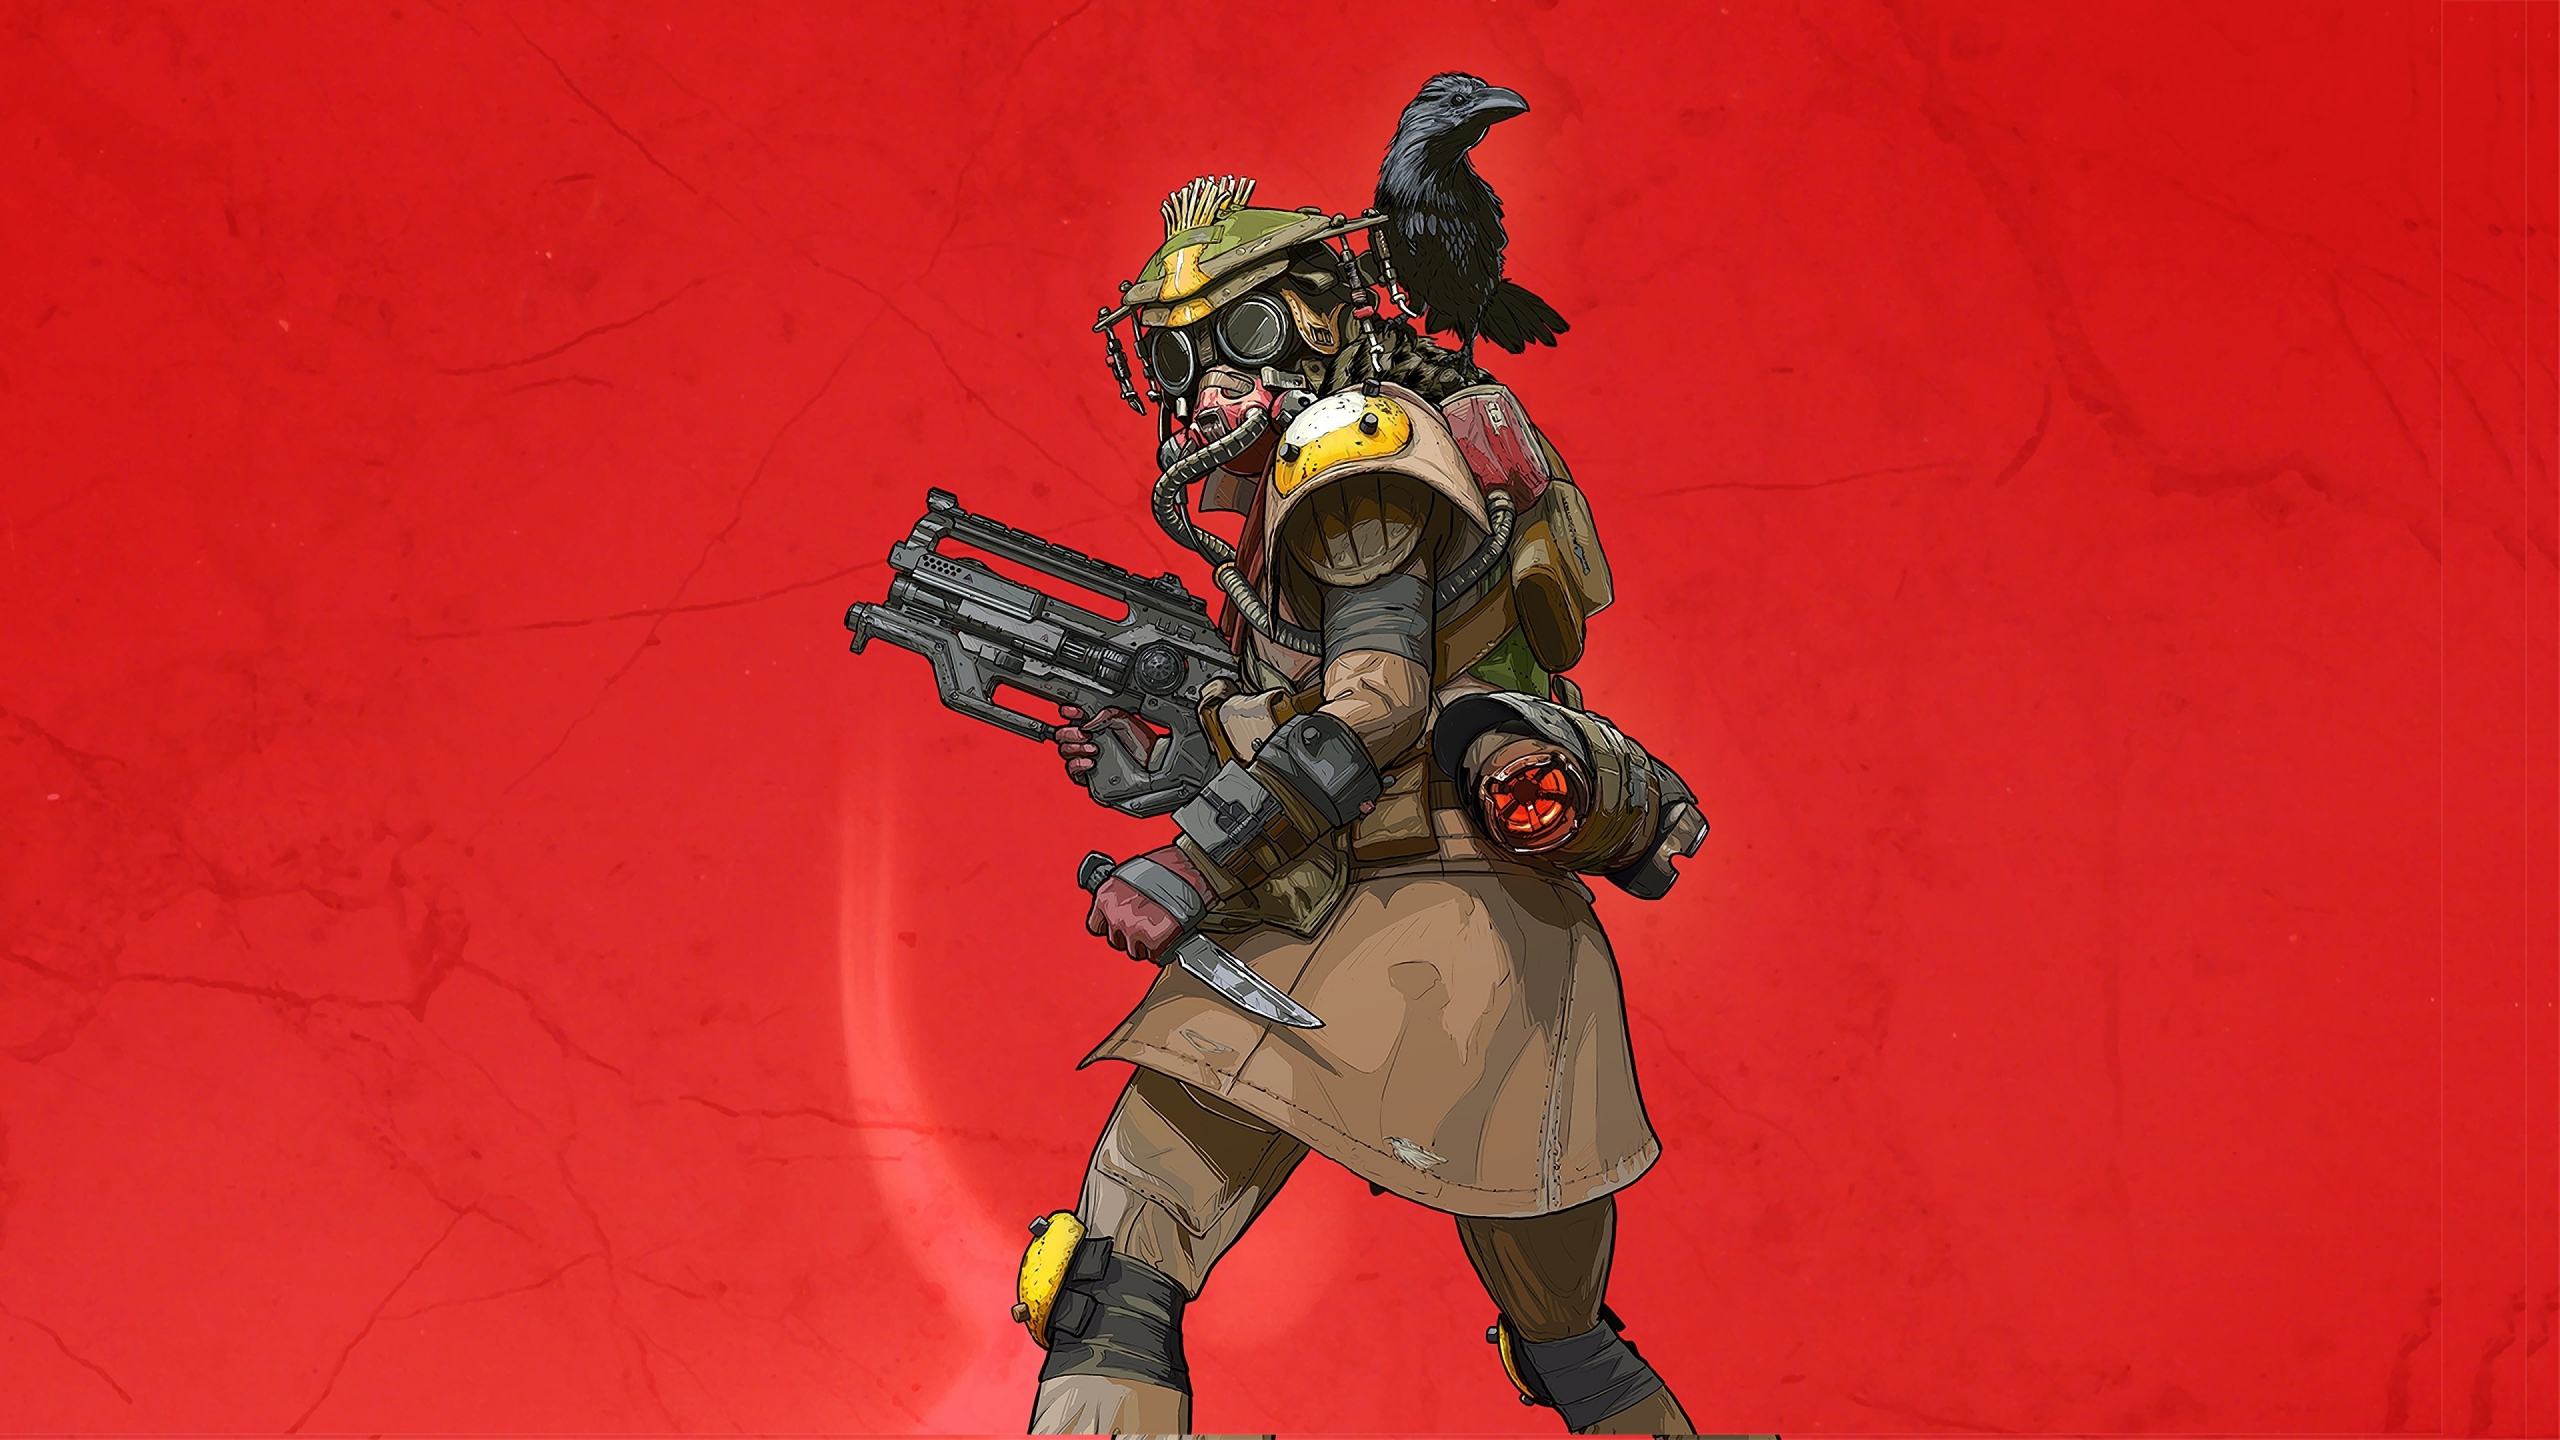 Download Video Game Apex Legends 19 2560x1440 Wallpaper Dual Wide 16 9 2560x1440 Hd Image Background